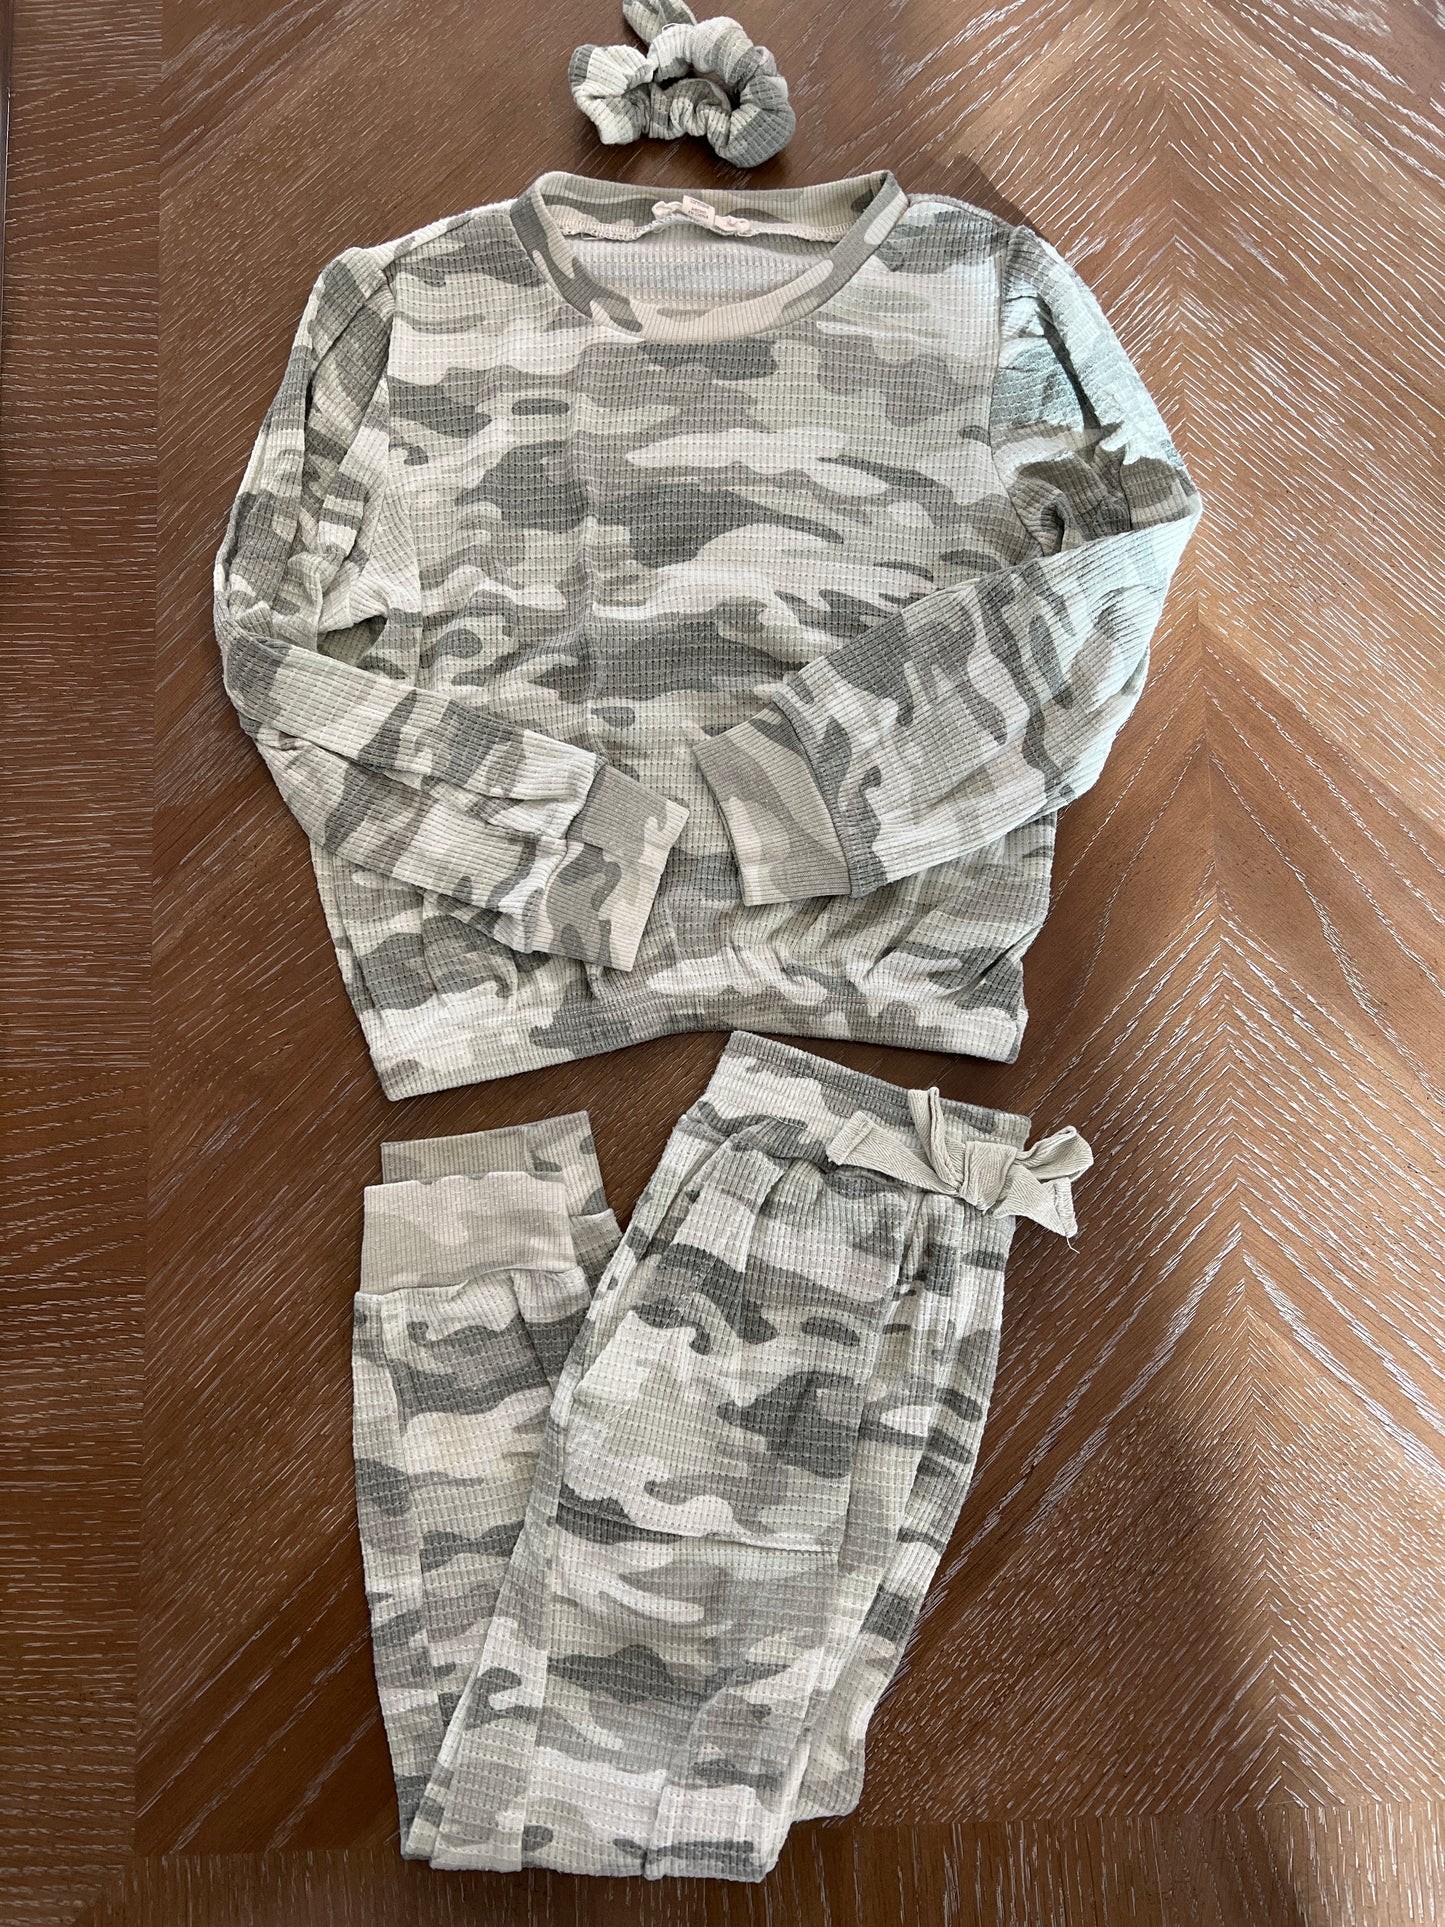 Jessica Simpson camo jogger set with matching scrunchie